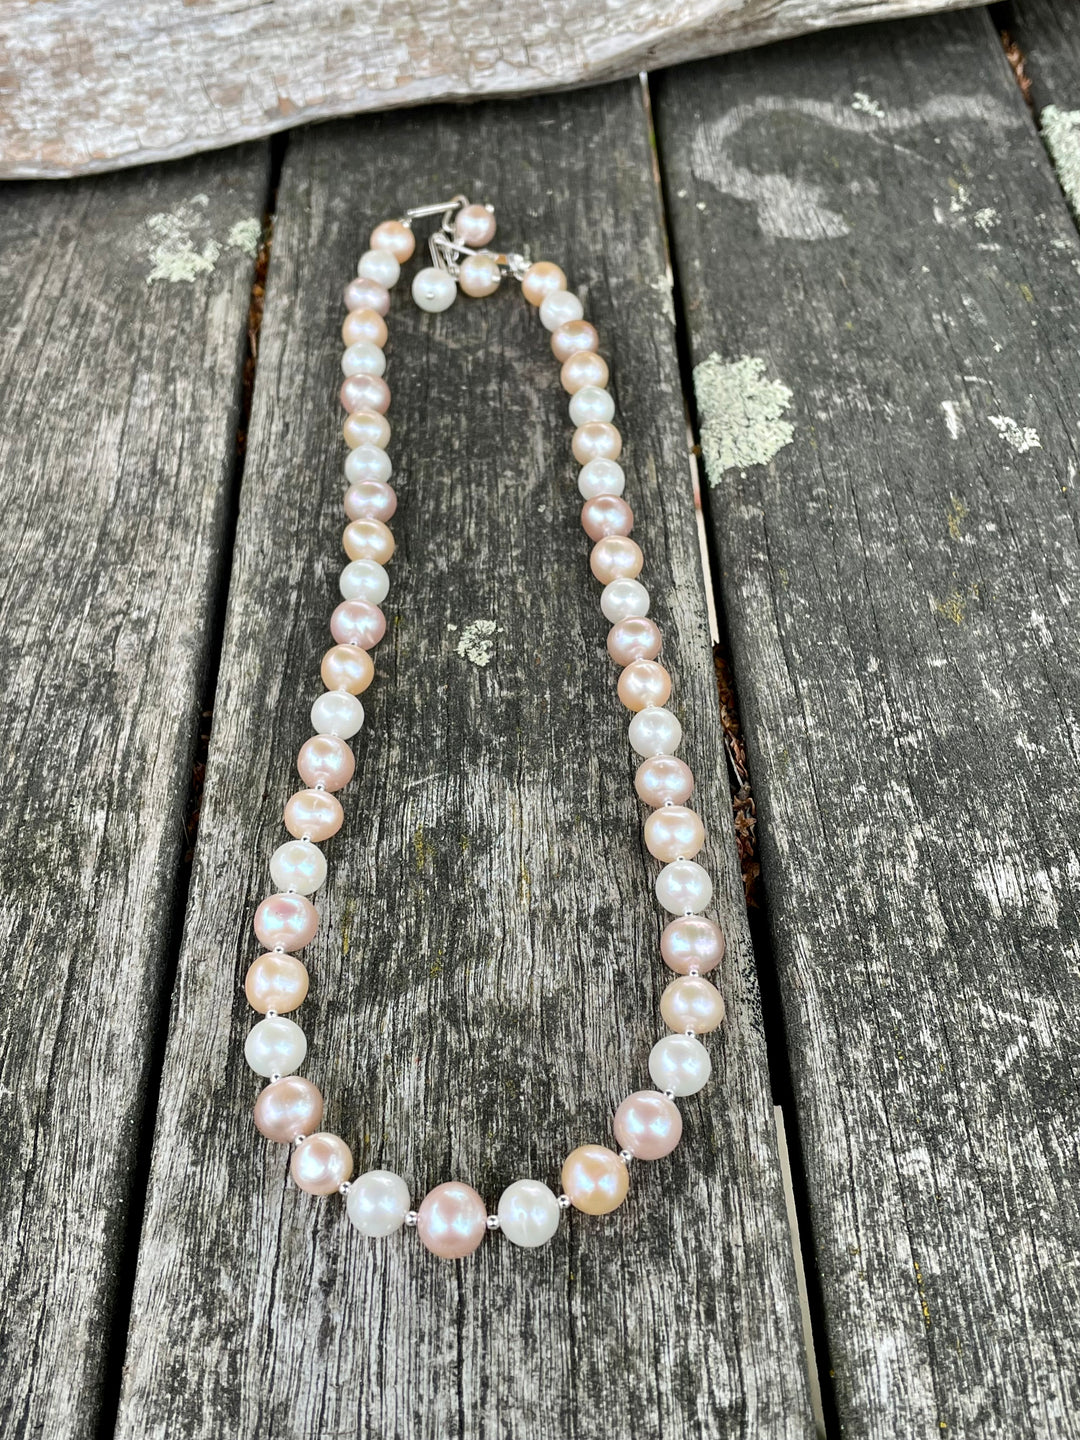 Pink, white and apricot freshwater pearl necklace